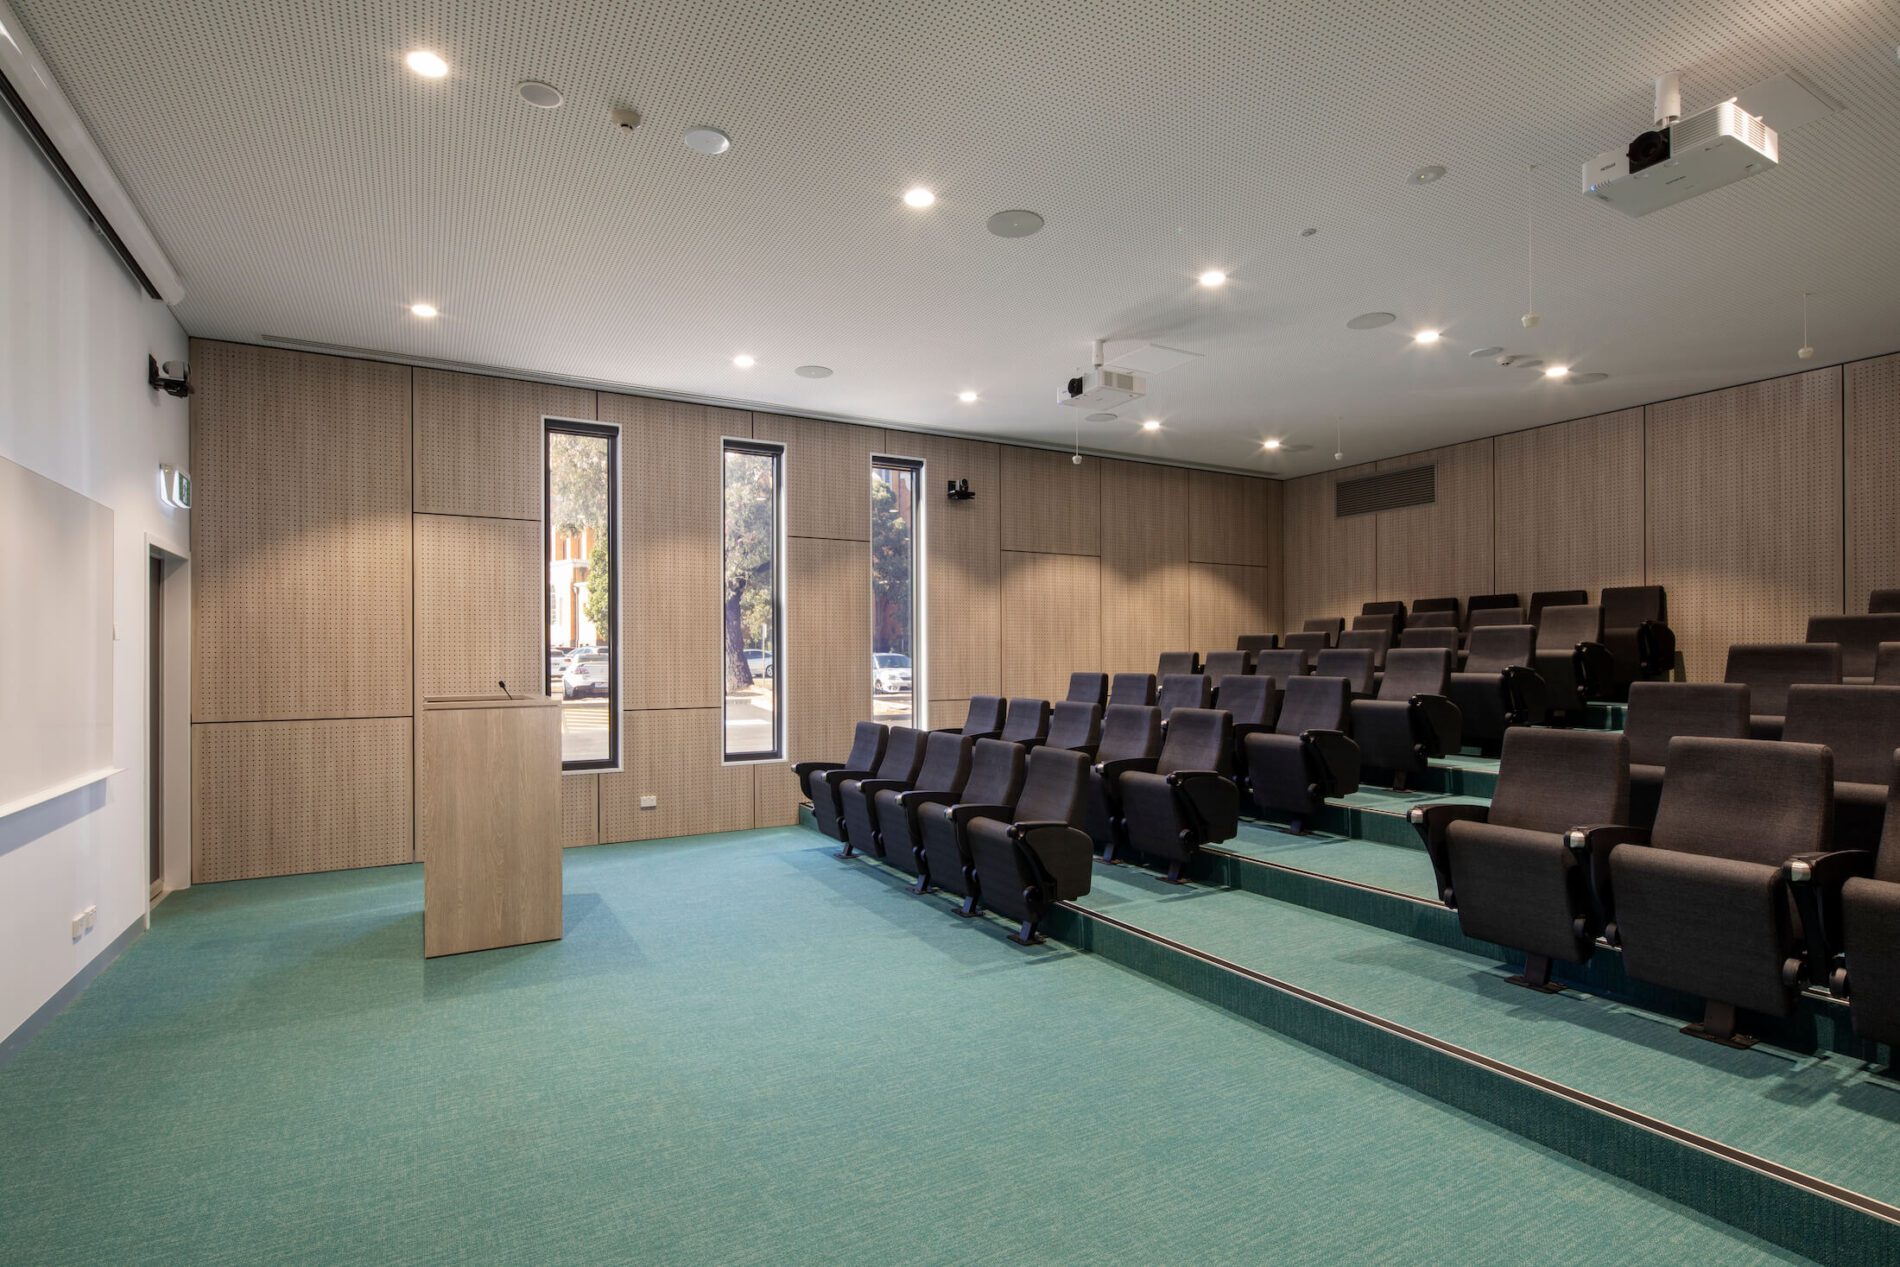 Tiered seating lecture theatre with timber veneer laminate podium and perforated veneer wall panels